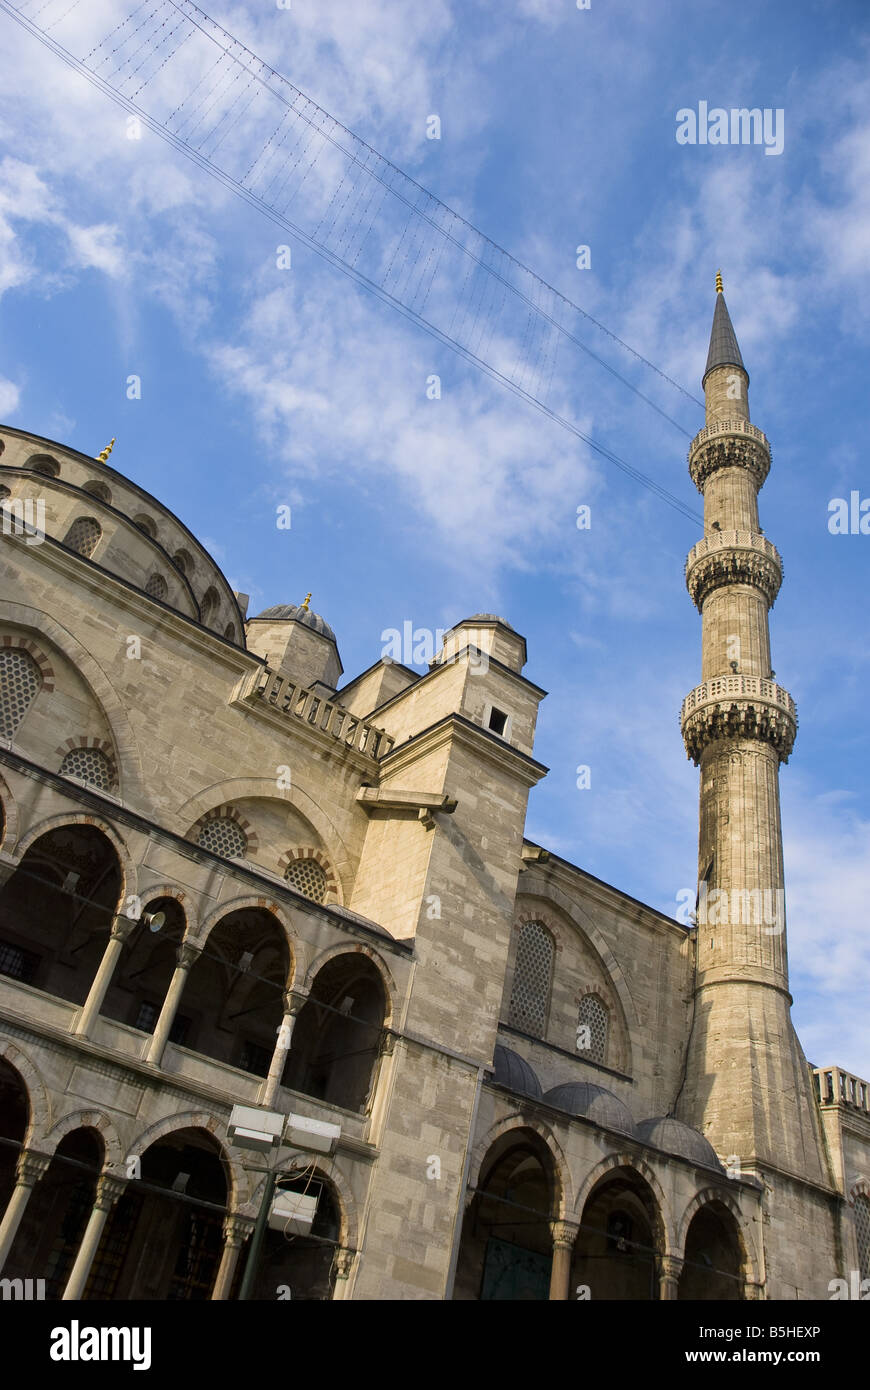 The Blue Mosque set against a blue sky, showing the domed ceiling and minaret tower, in Istanbul, Turkey. Stock Photo